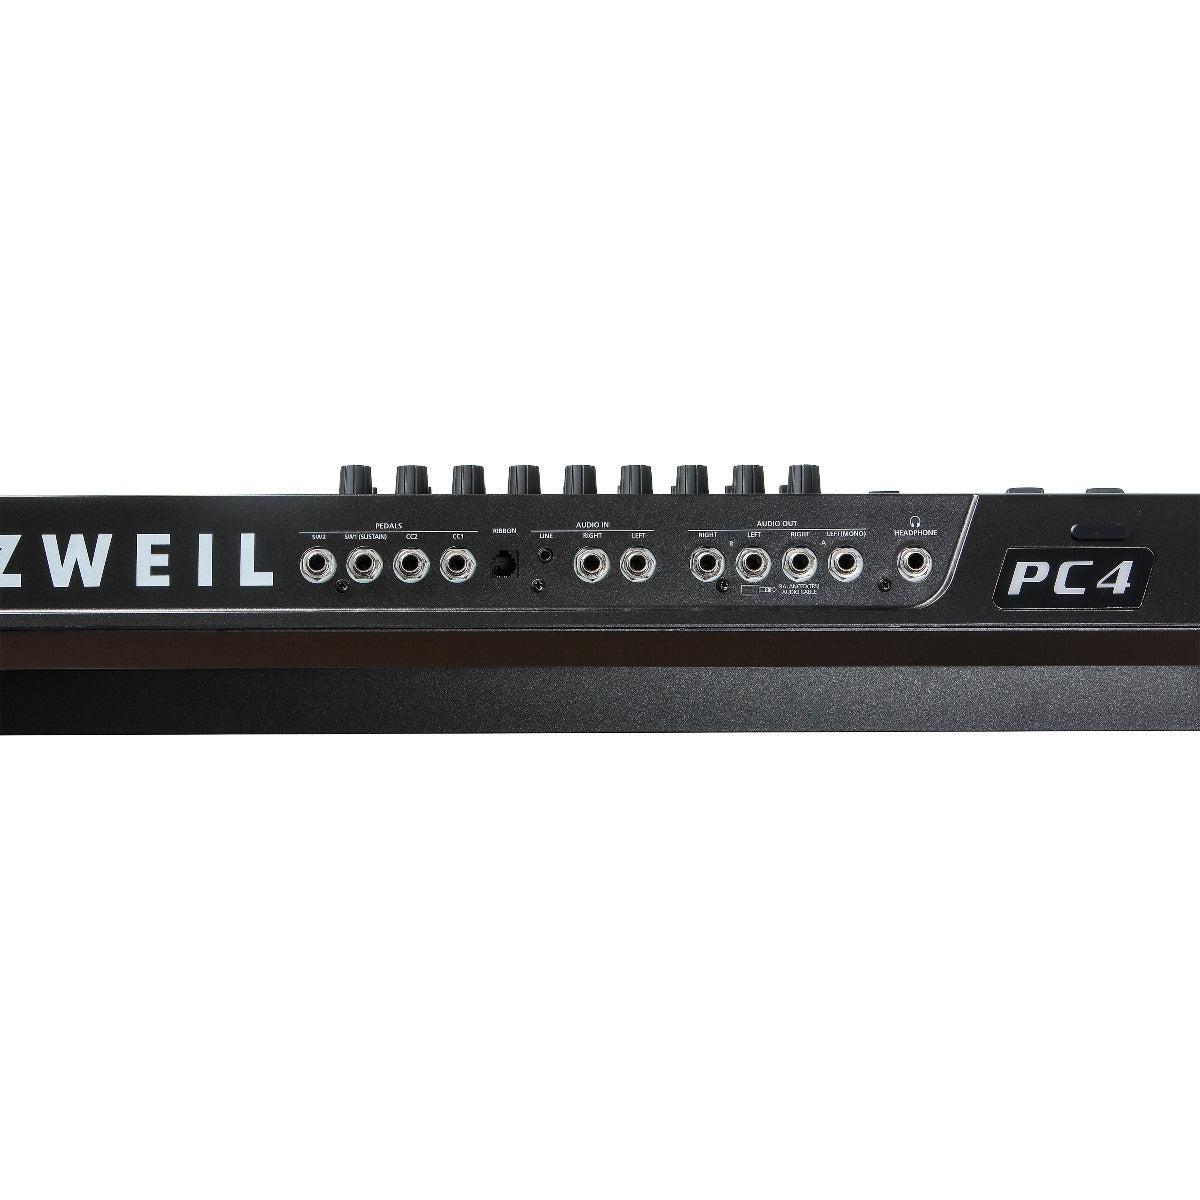 Detail rear view of Kurzweil PC4-7 76-Key Workstation Keyboard showing audio and pedal connections